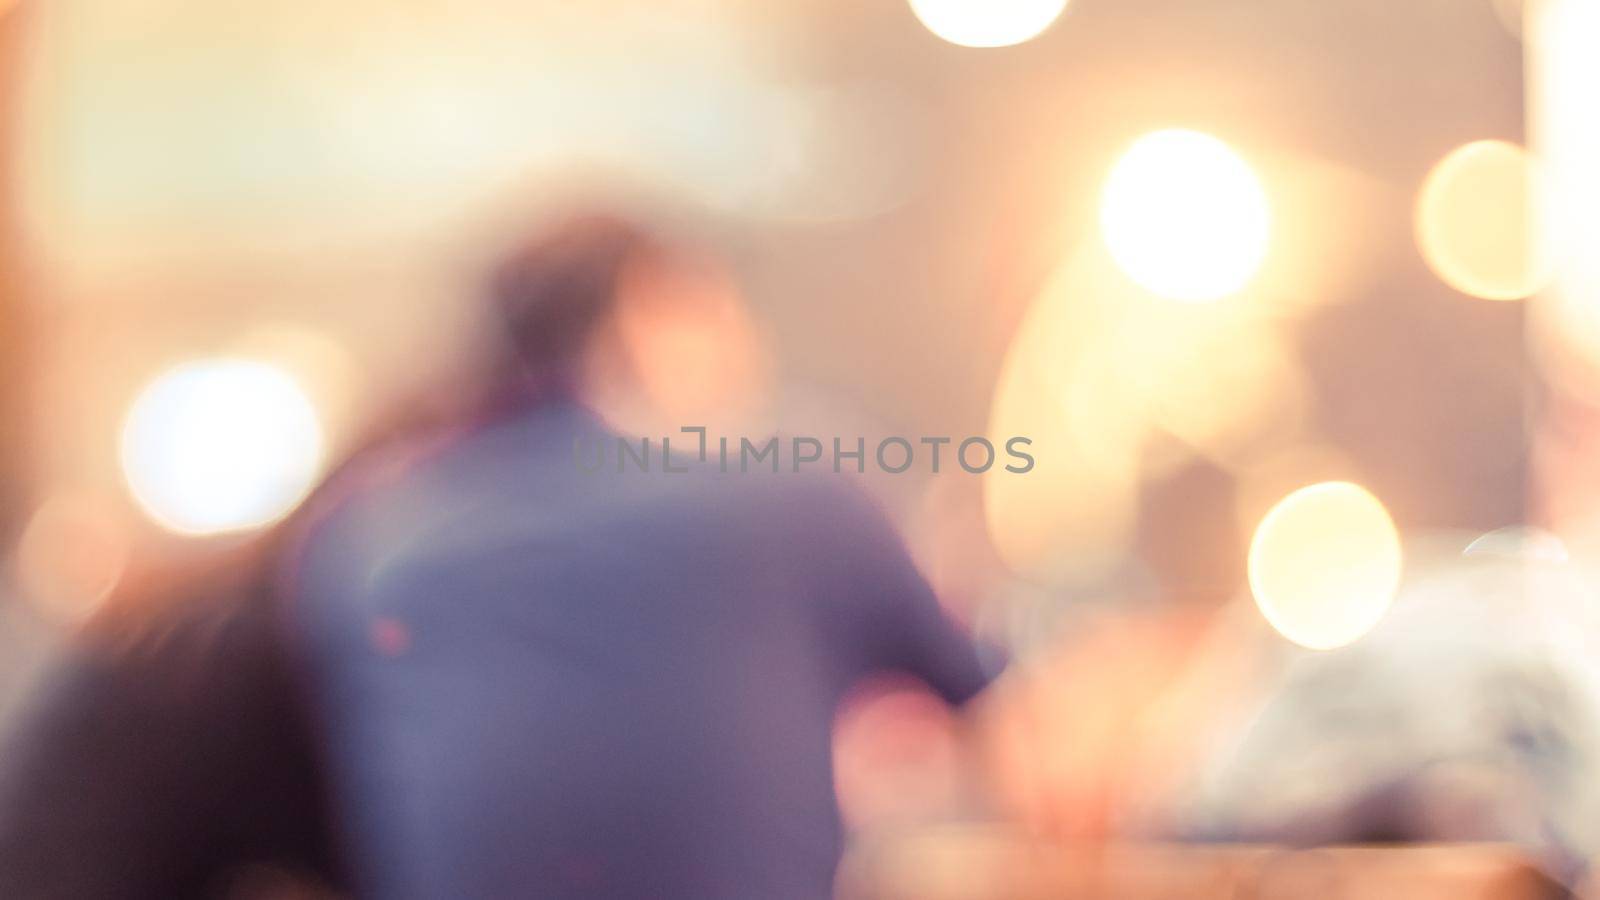 Blur photography for background in restaurant on the background of the couple by Petrichor